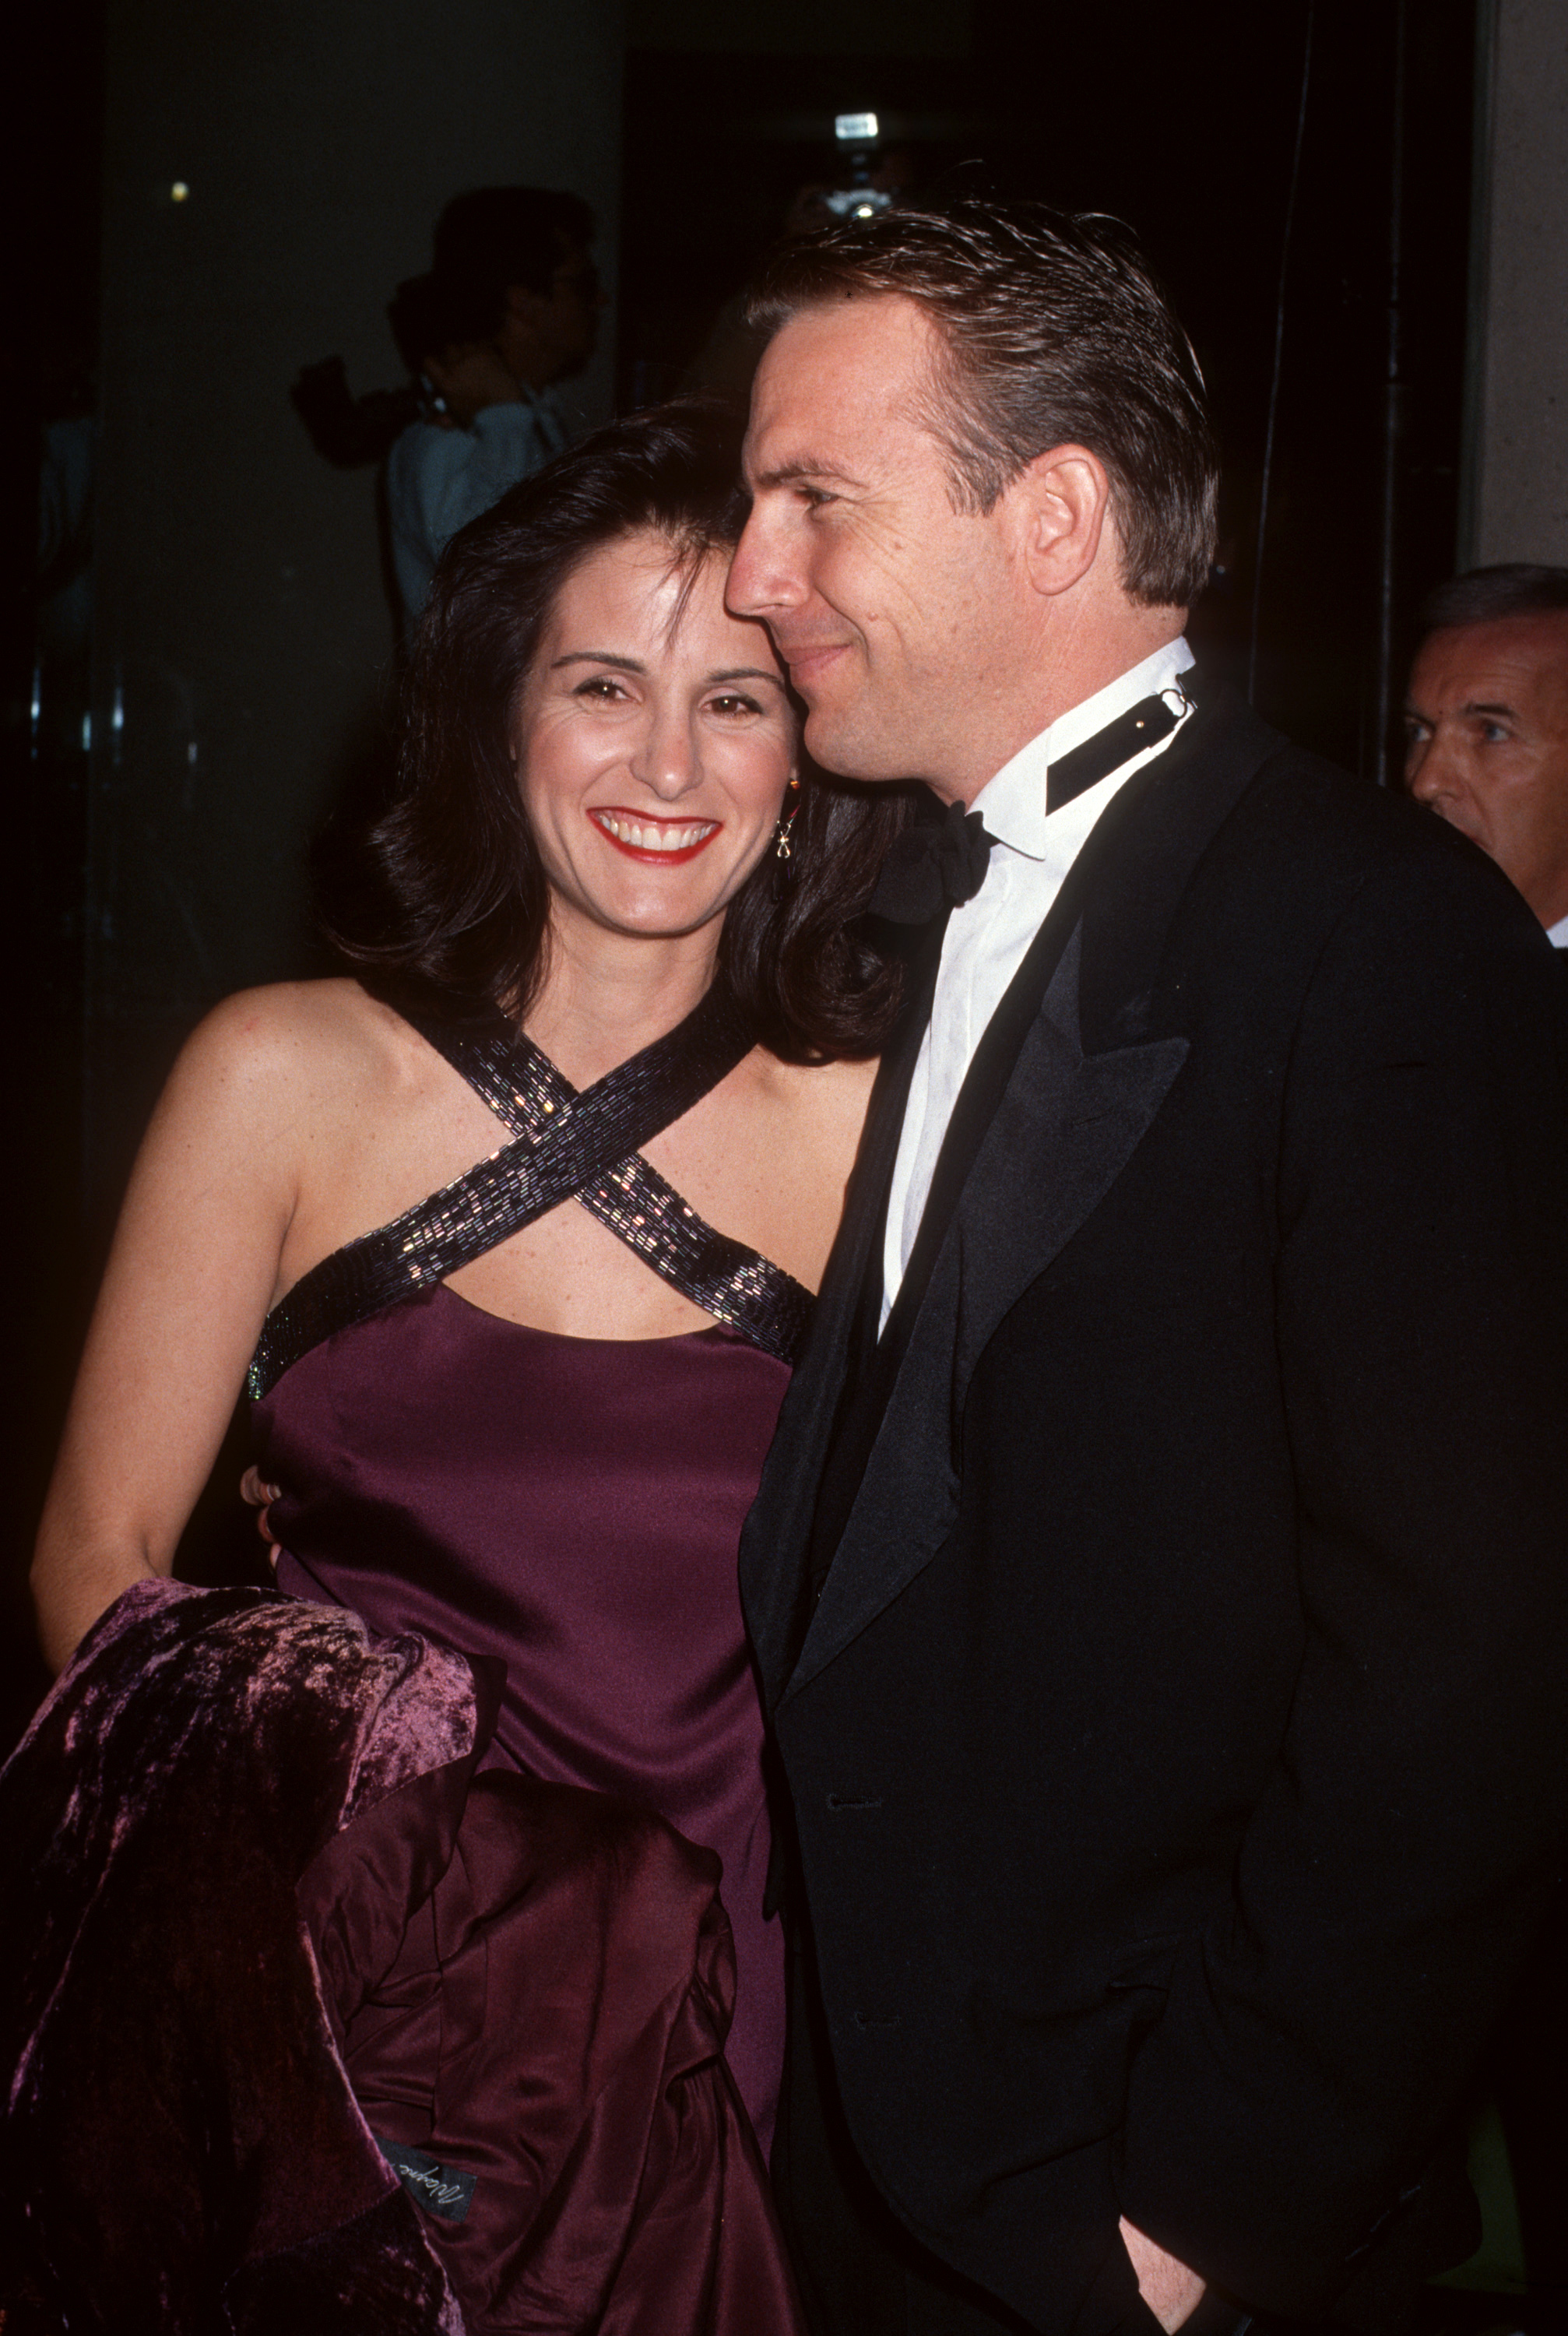 Cindy Silva and Kevin Costner at the 48th Annual Golden Globe Awards in Beverly Hills, 1991. | Source: Getty Images